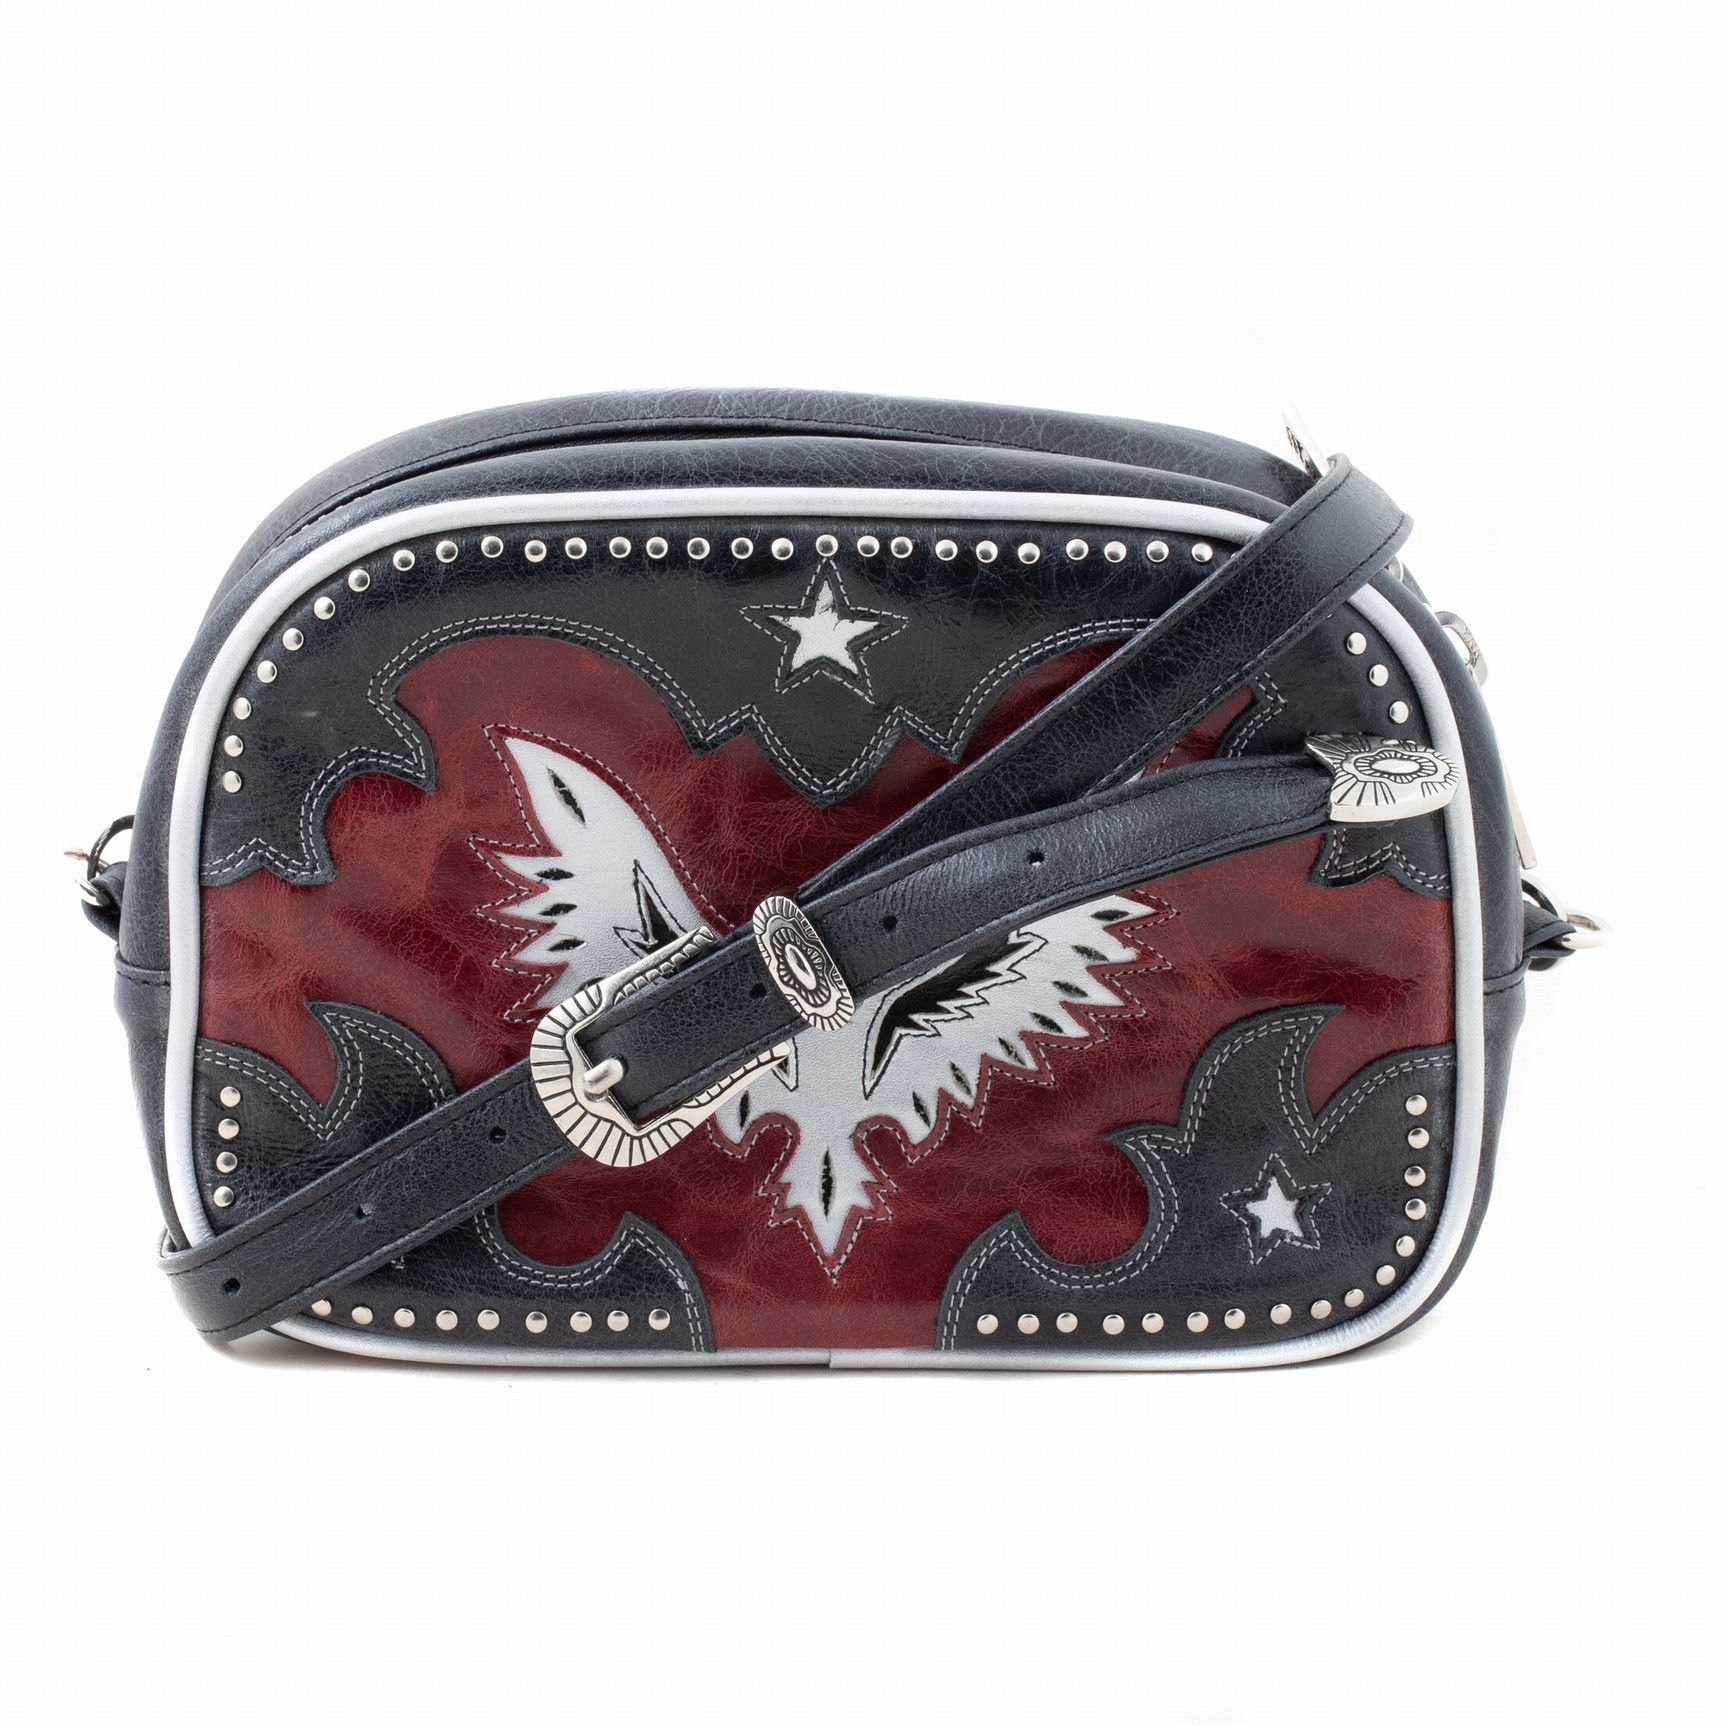 MINIBAG EAGLE RED BLACK SILVER MINI BAG WITH LEATHER INLAY AND STUDS  Mix color red / black / silver  Cowhide leather  Leather l